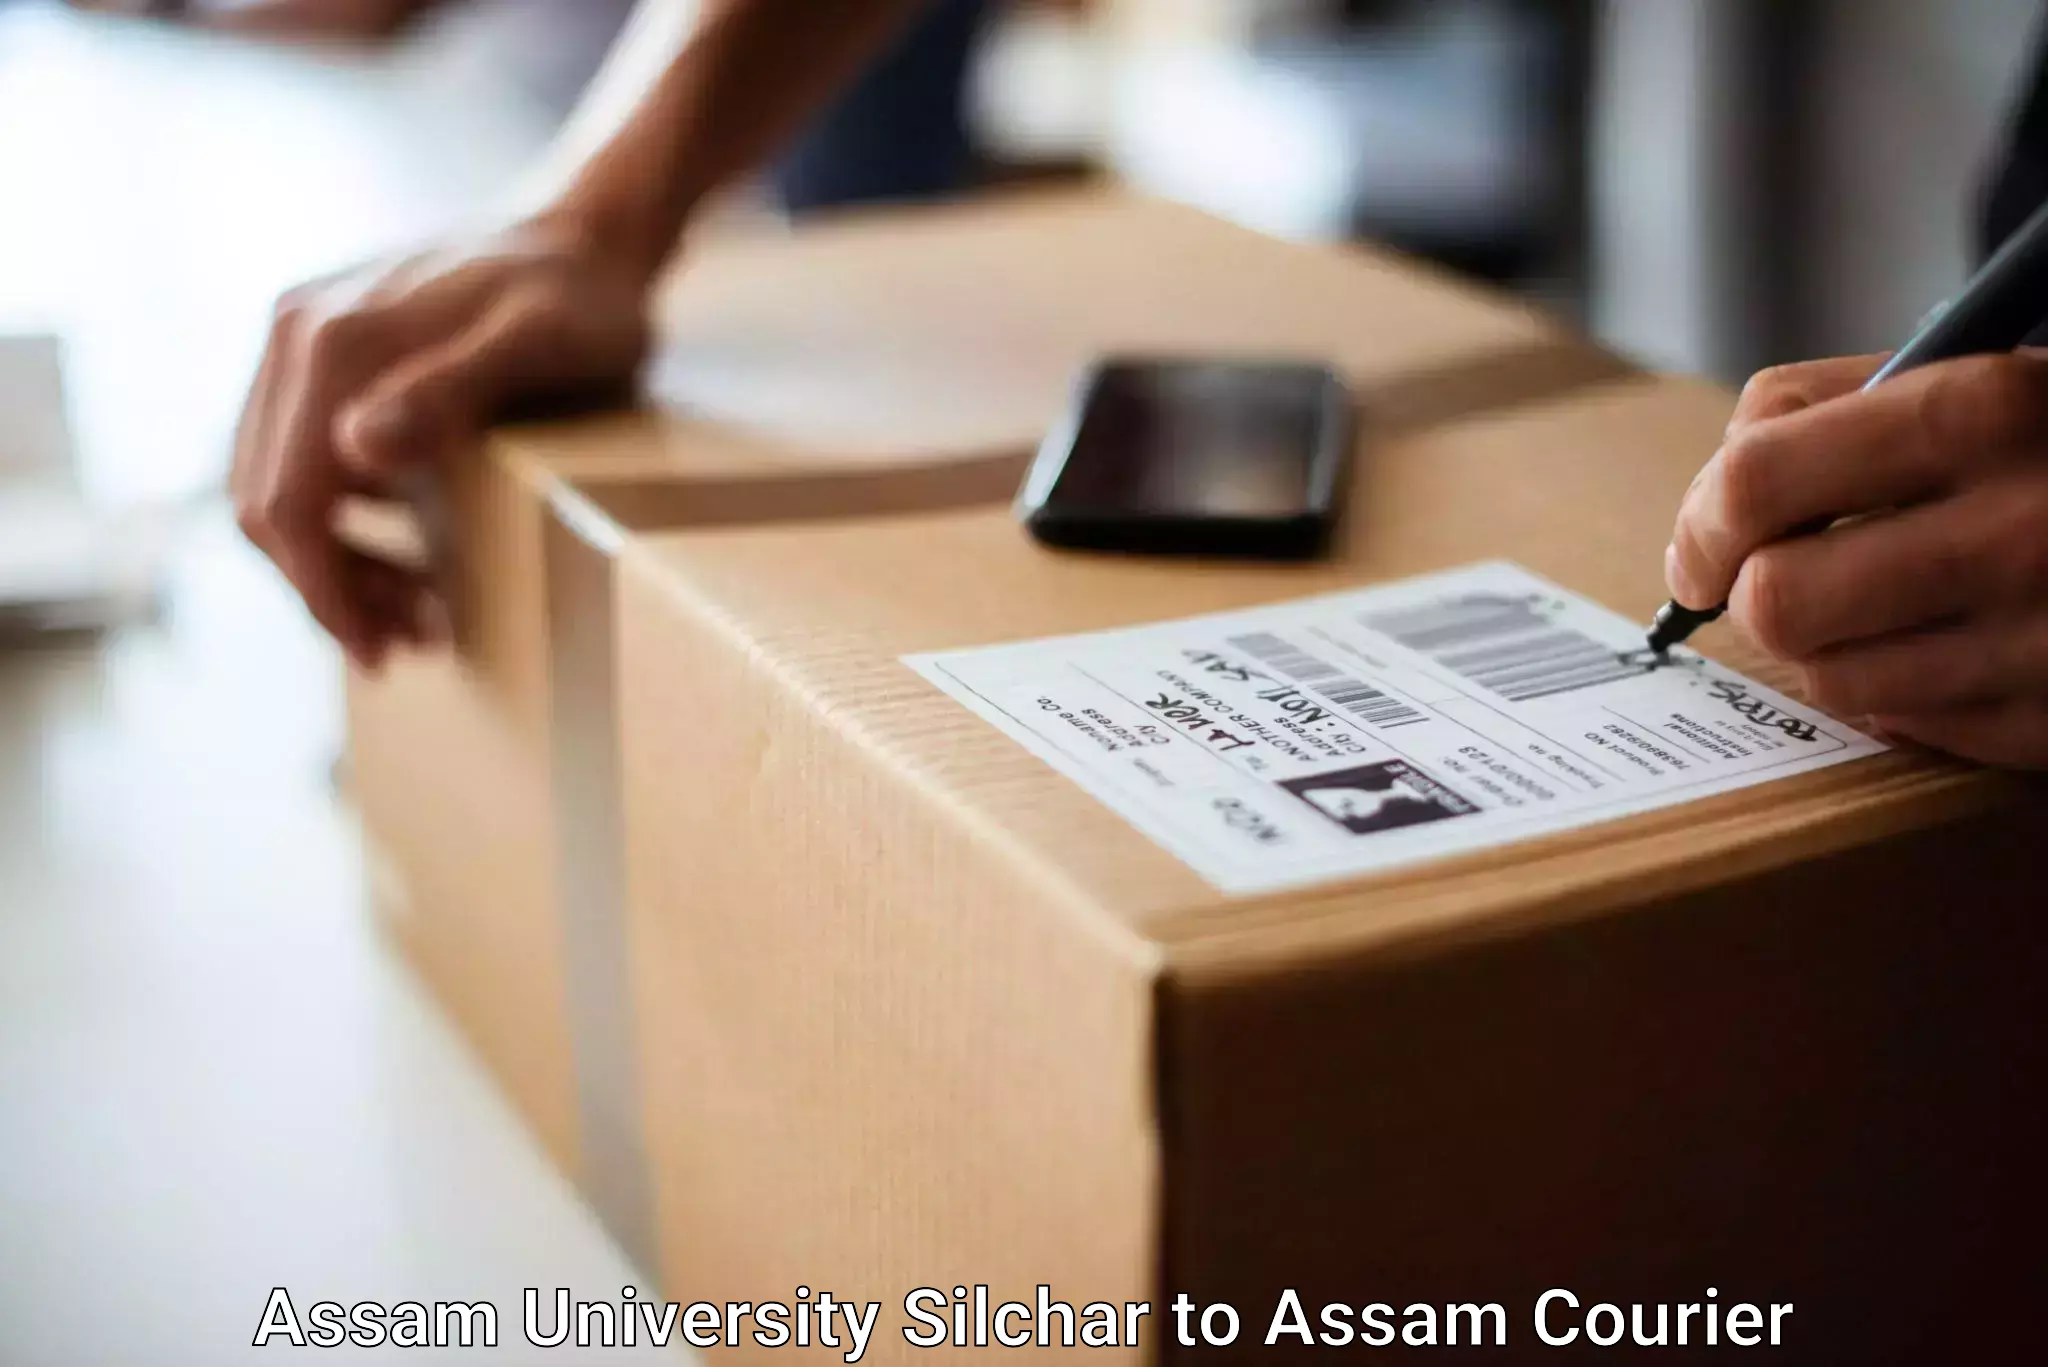 Baggage relocation service in Assam University Silchar to Dibrugarh